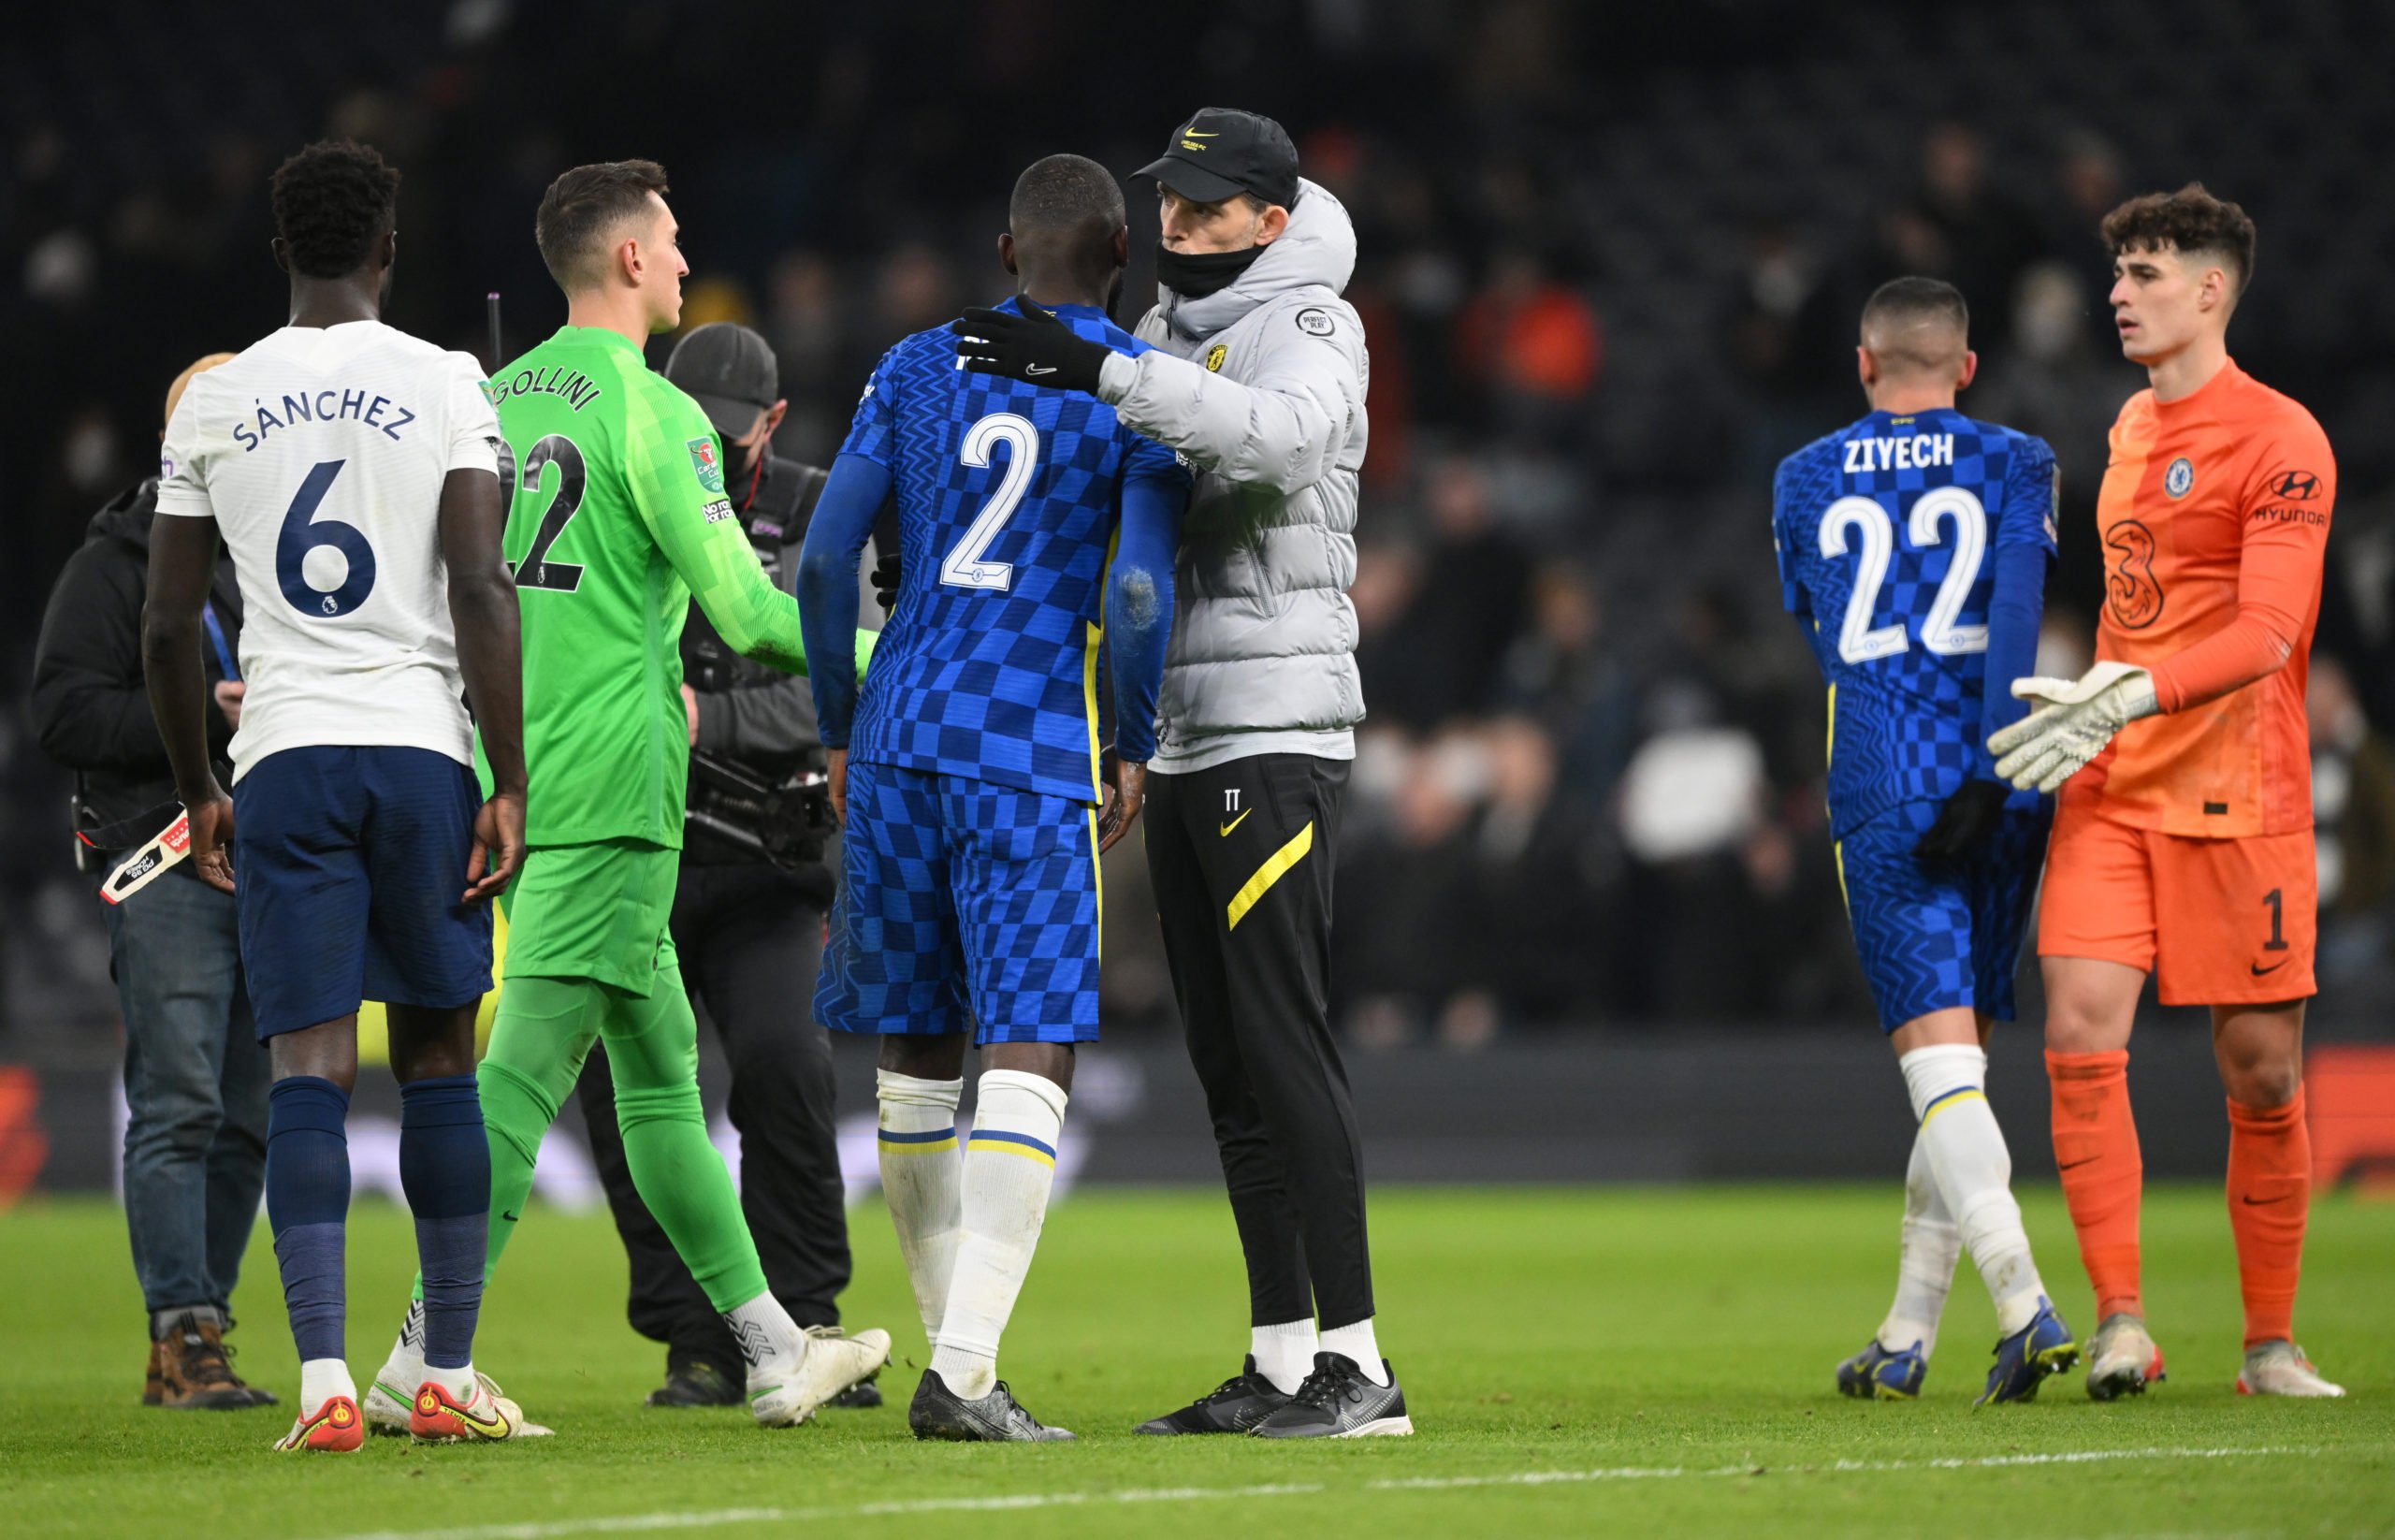 Report: Tuchel manages to change Granovskaia's stance regarding 'amazing' Chelsea player, talks held recently